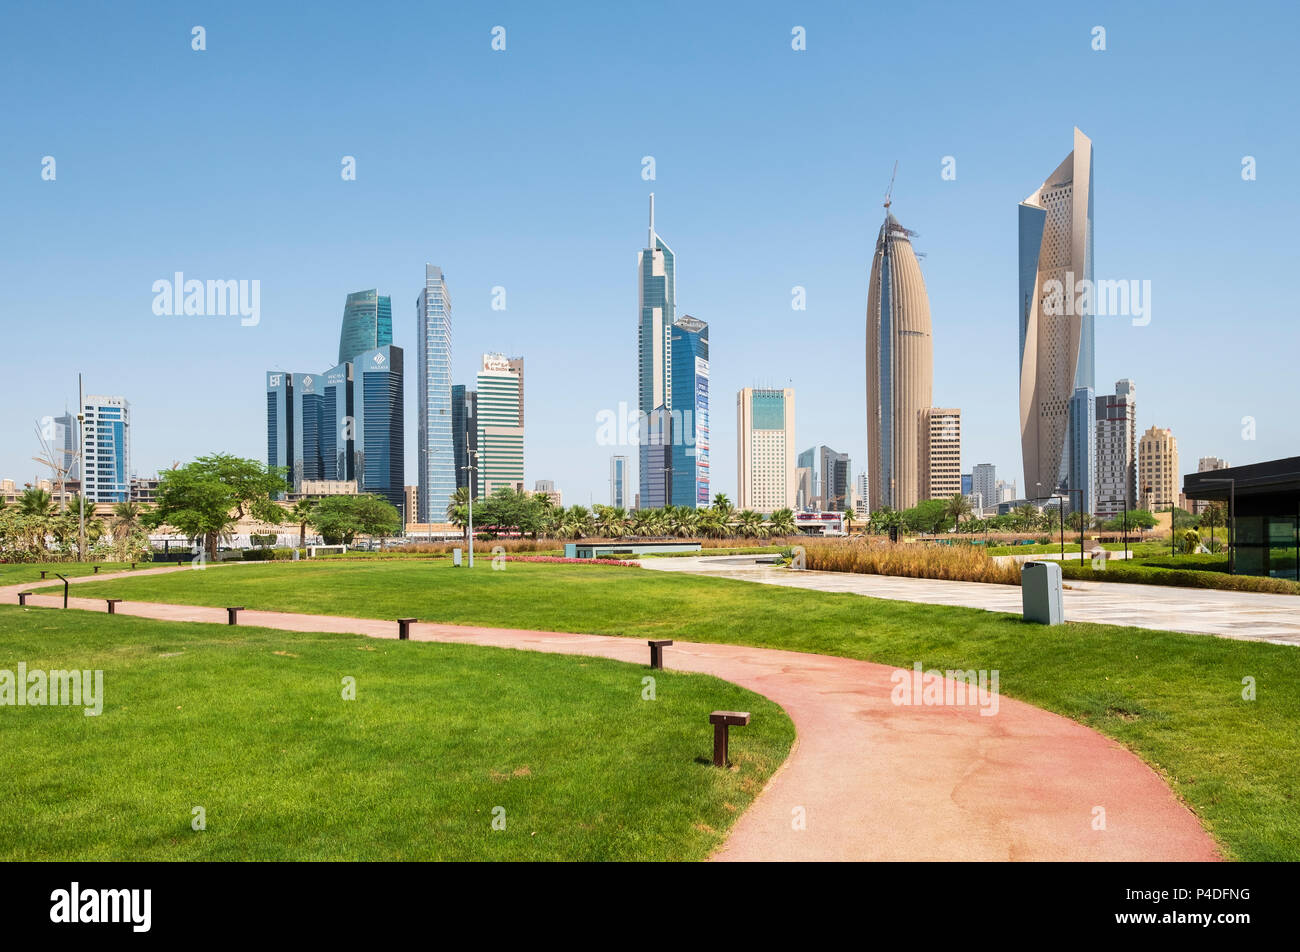 Skyline of CBD Central Business District from  Al Shaheed Park in Kuwait City, Kuwait Stock Photo